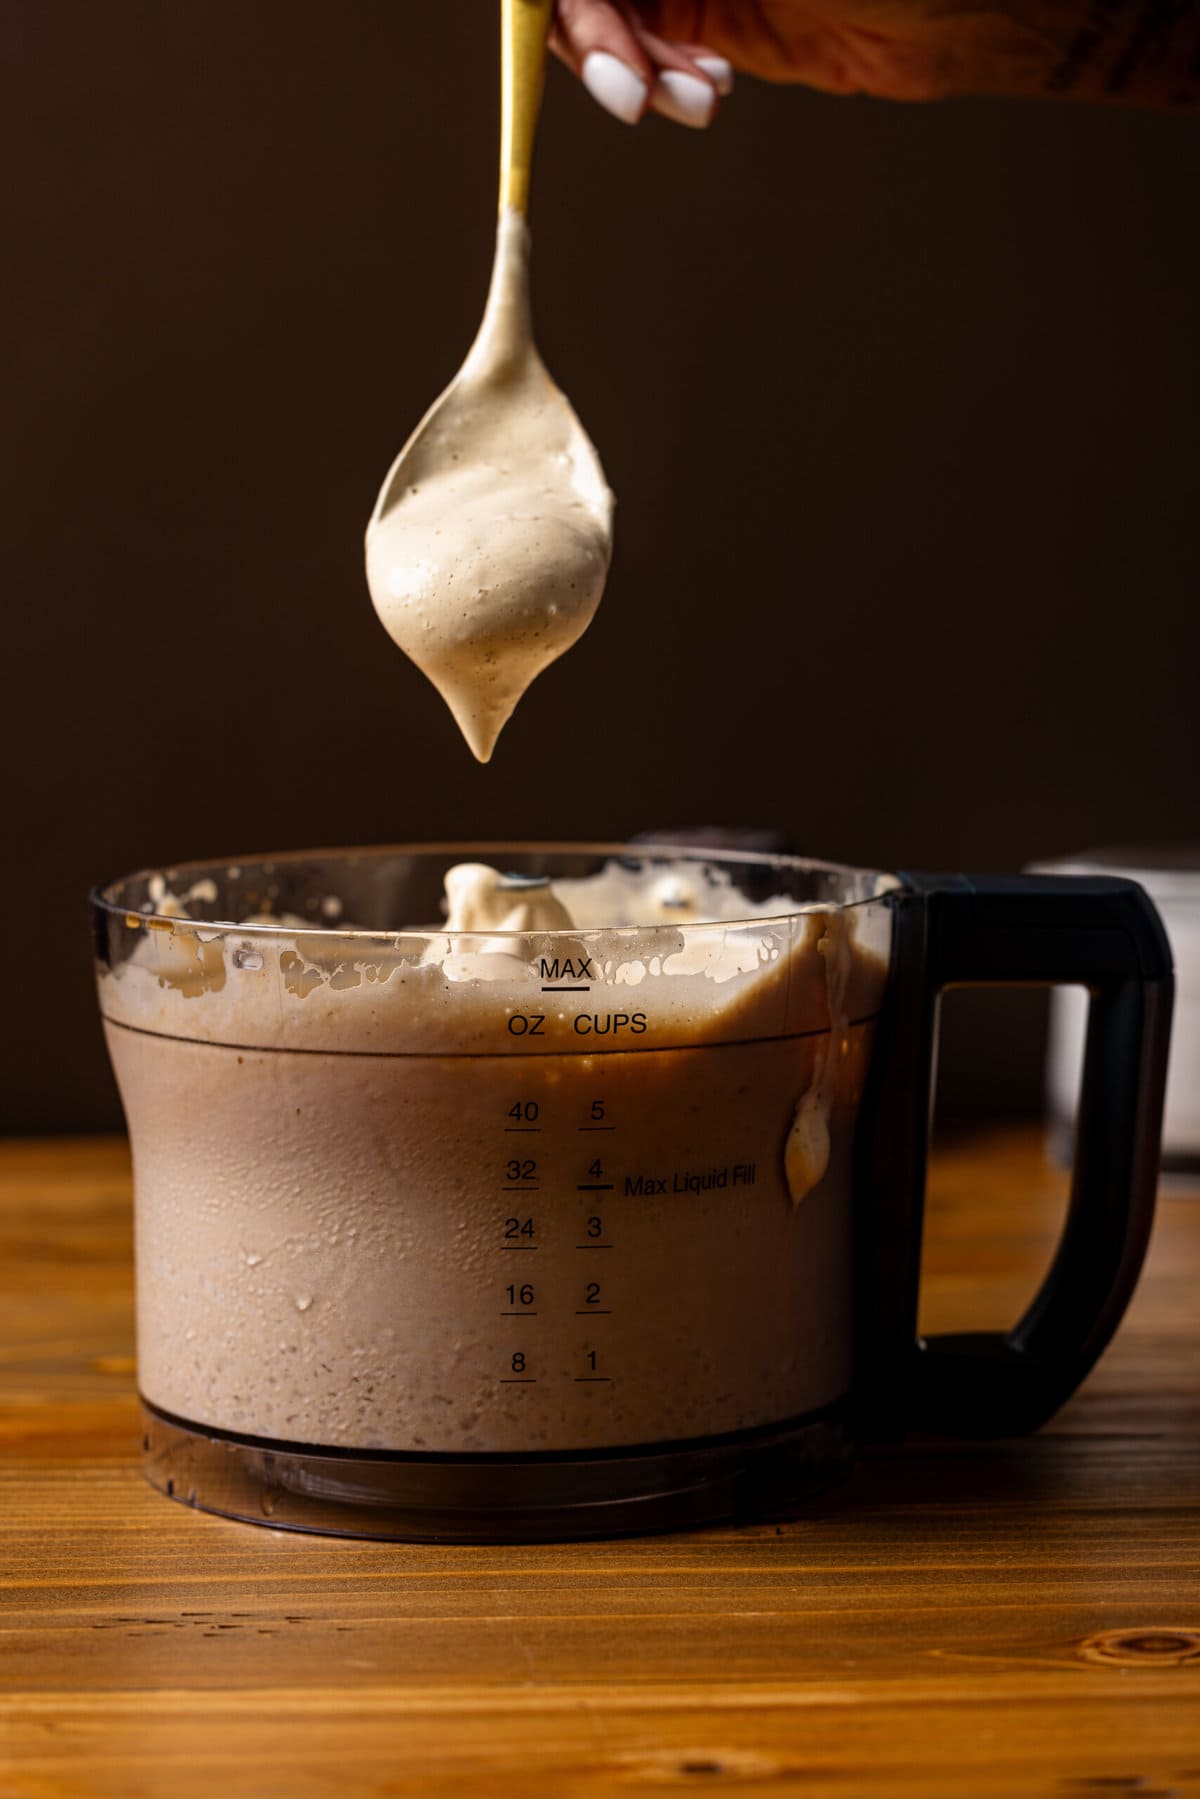 Front view of whipped coffee in a food processor being held up with a spoon.